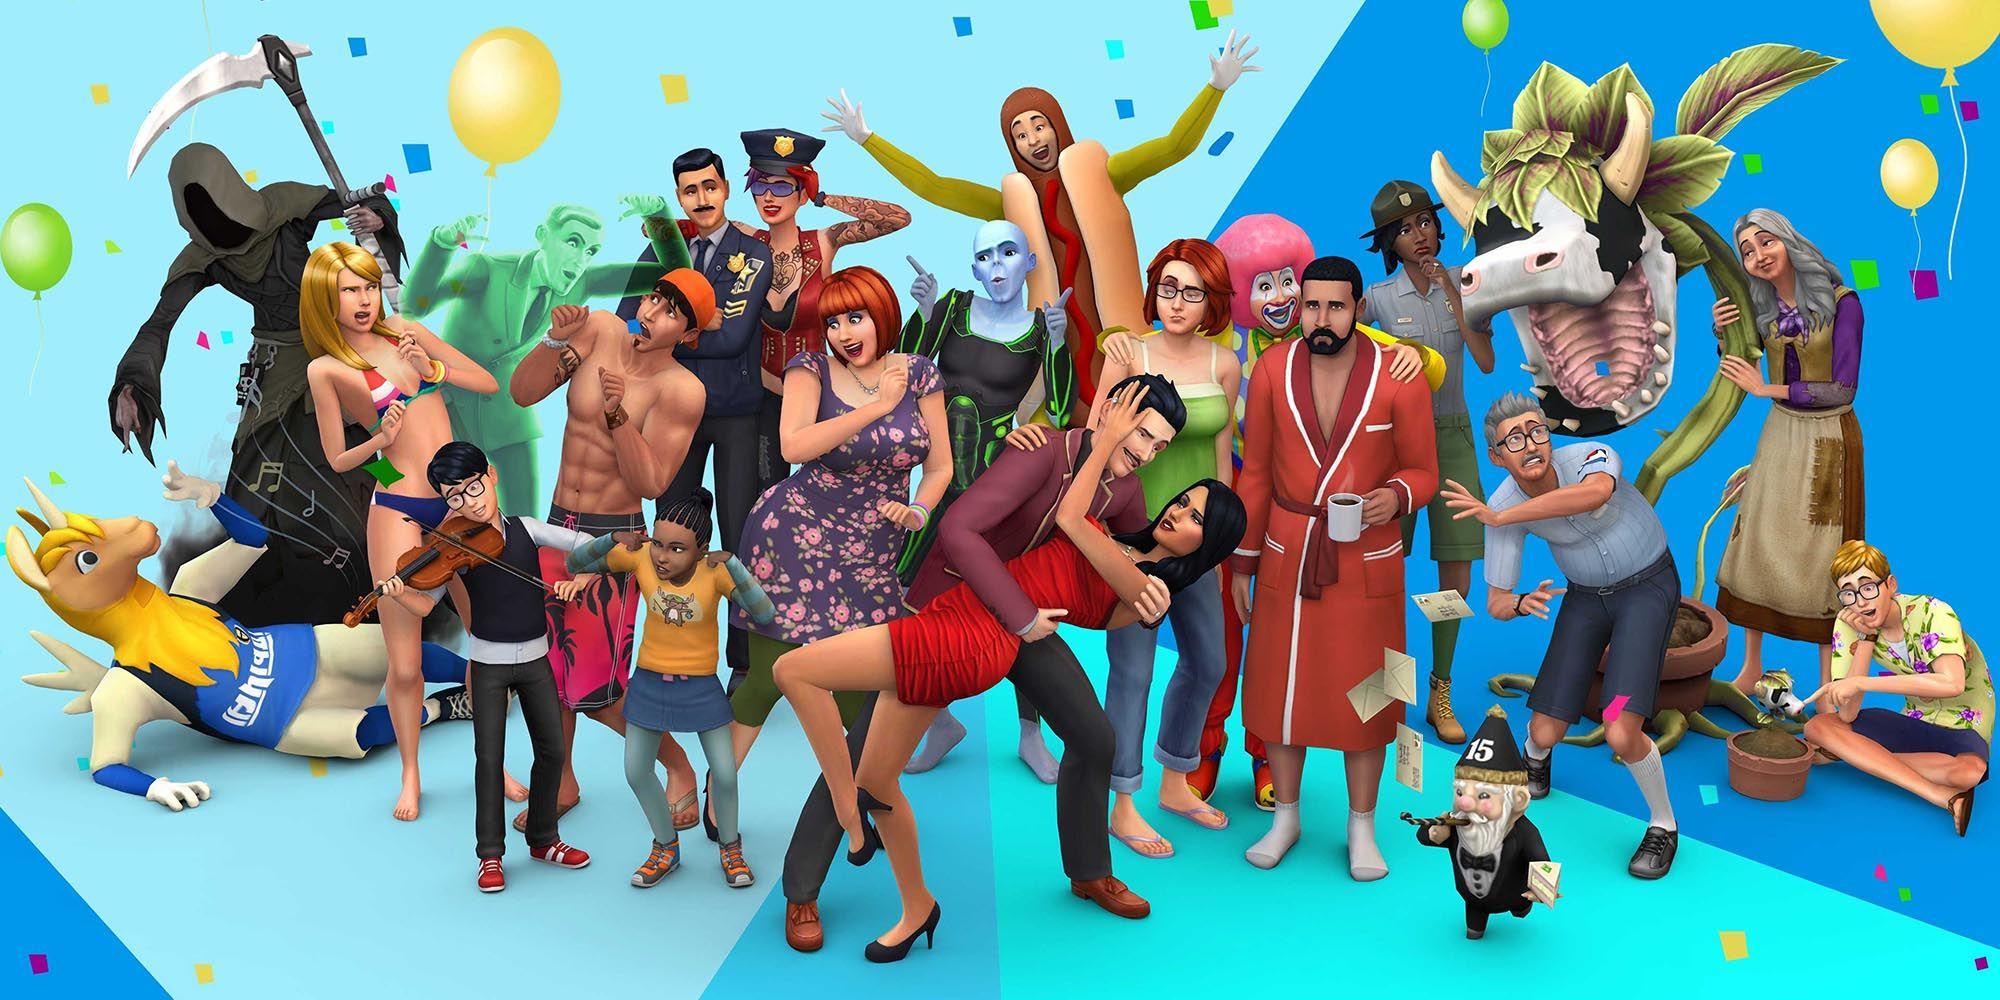 Sims 4 group photo